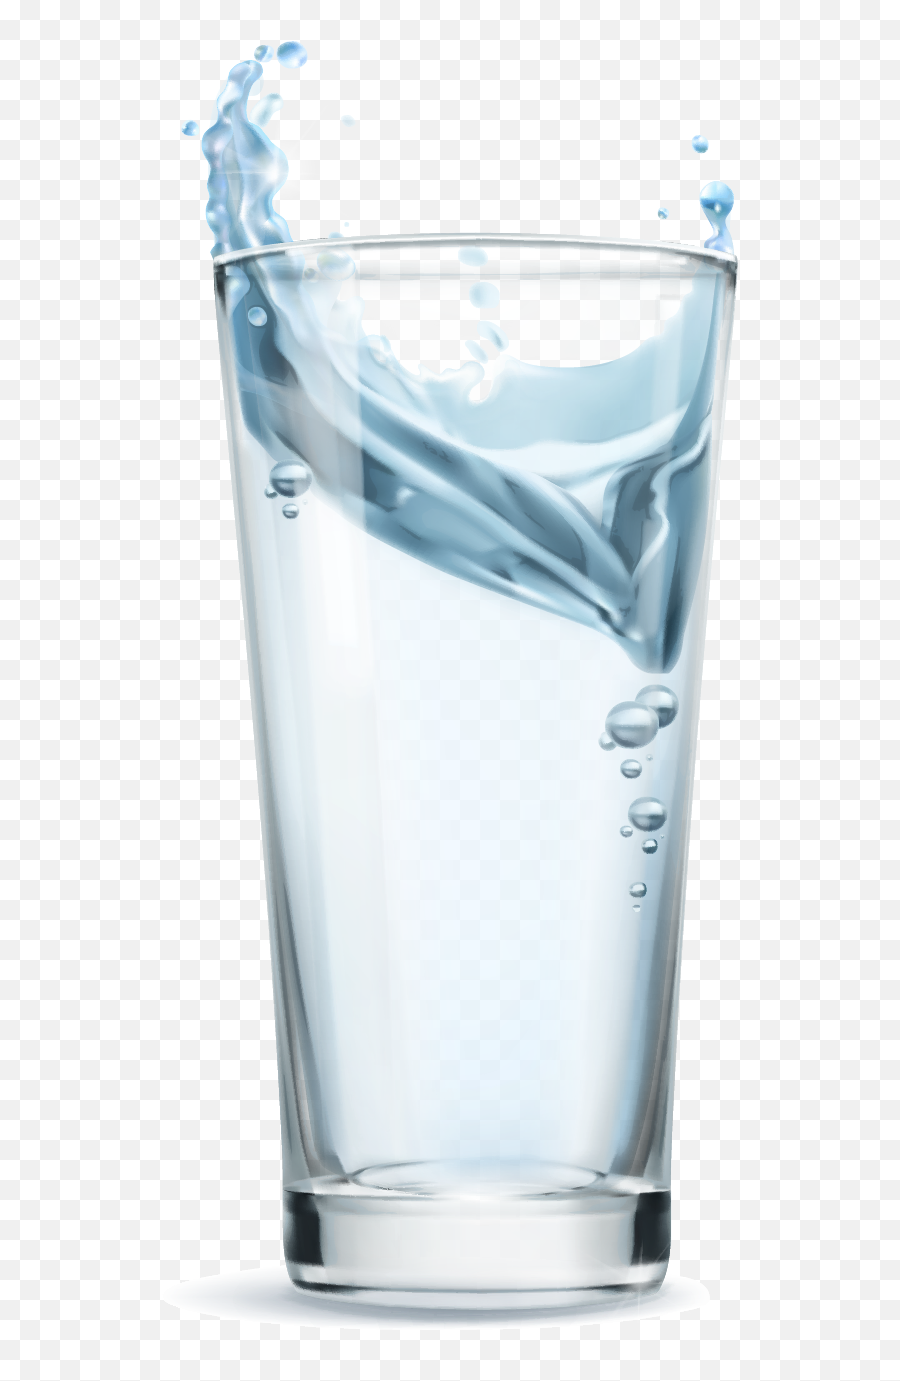 A Glass Of Water Vector Material Png Download - 8911801 Still Life Photography,Glass Of Water Png